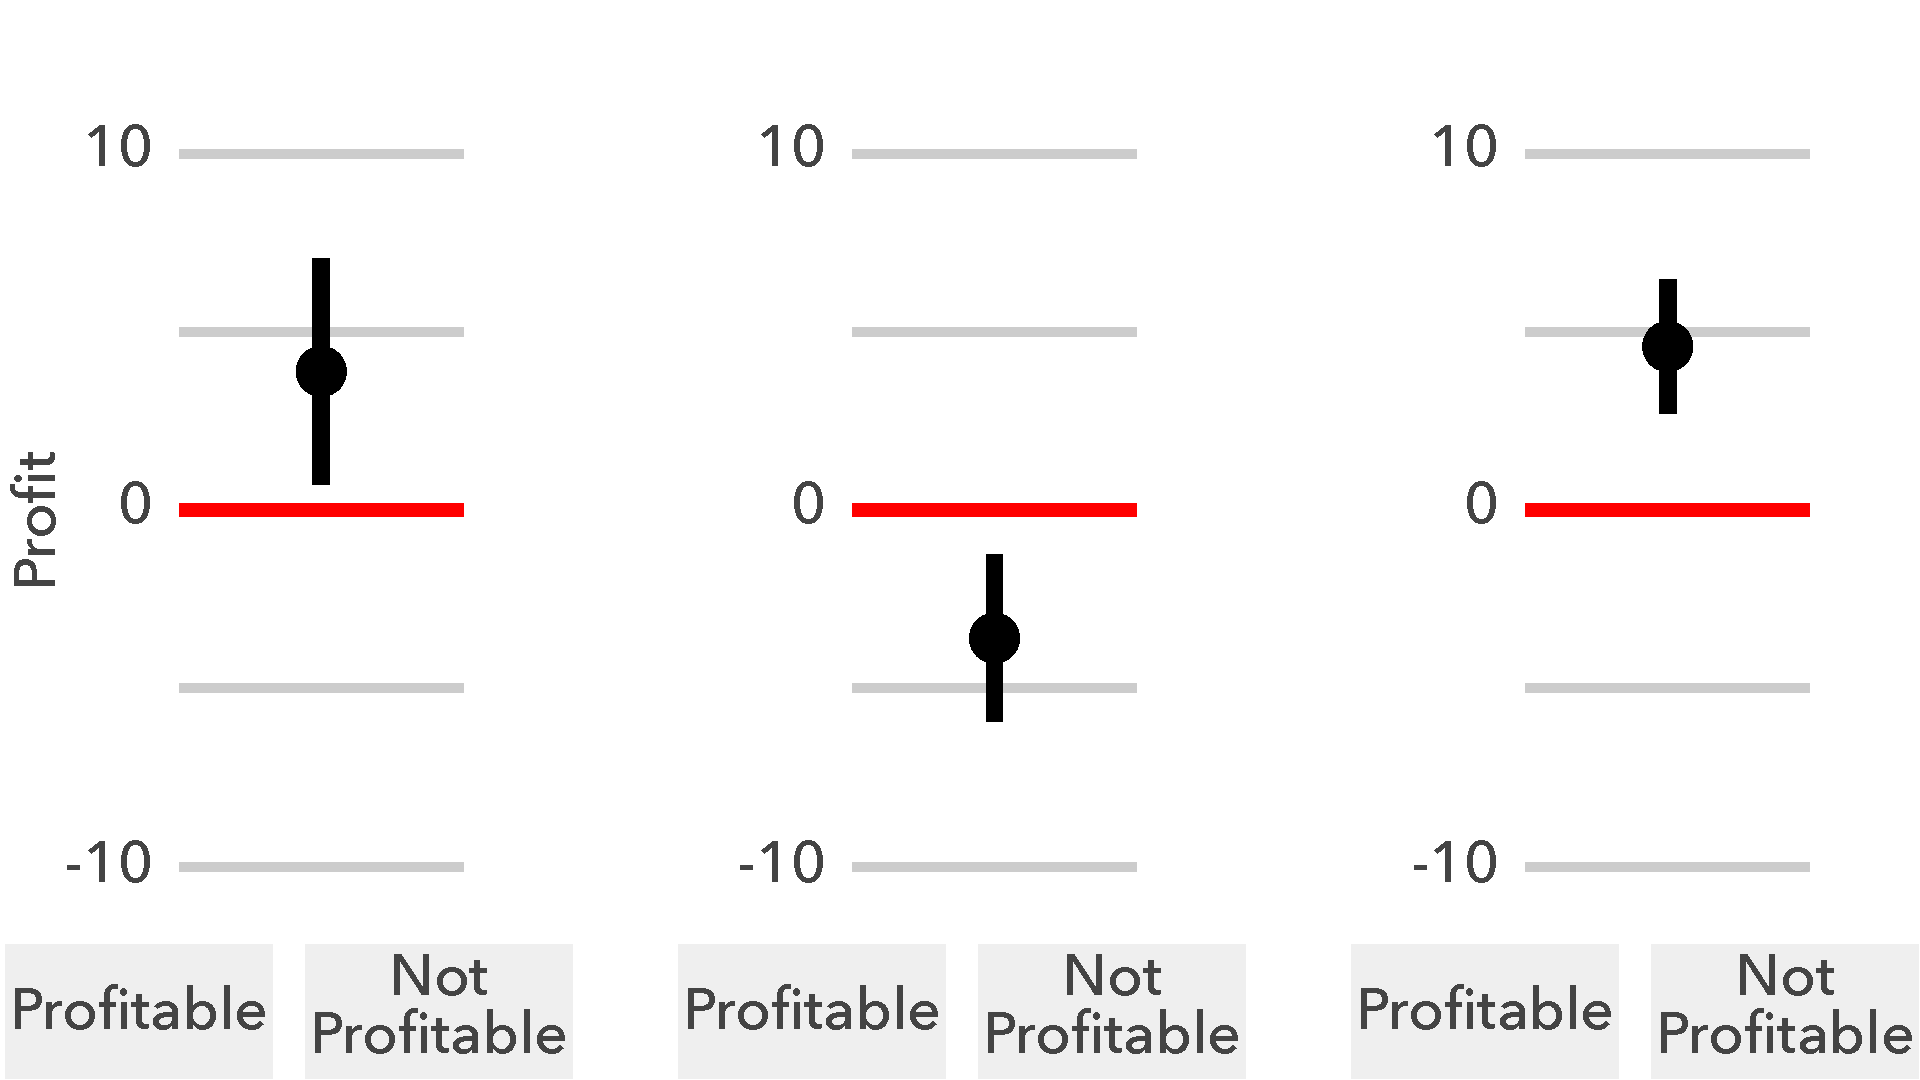 Visualization of three confidences intervals with a shared y-axis labeled "profit", with buttons to predict which will be really profitable given the sample information.